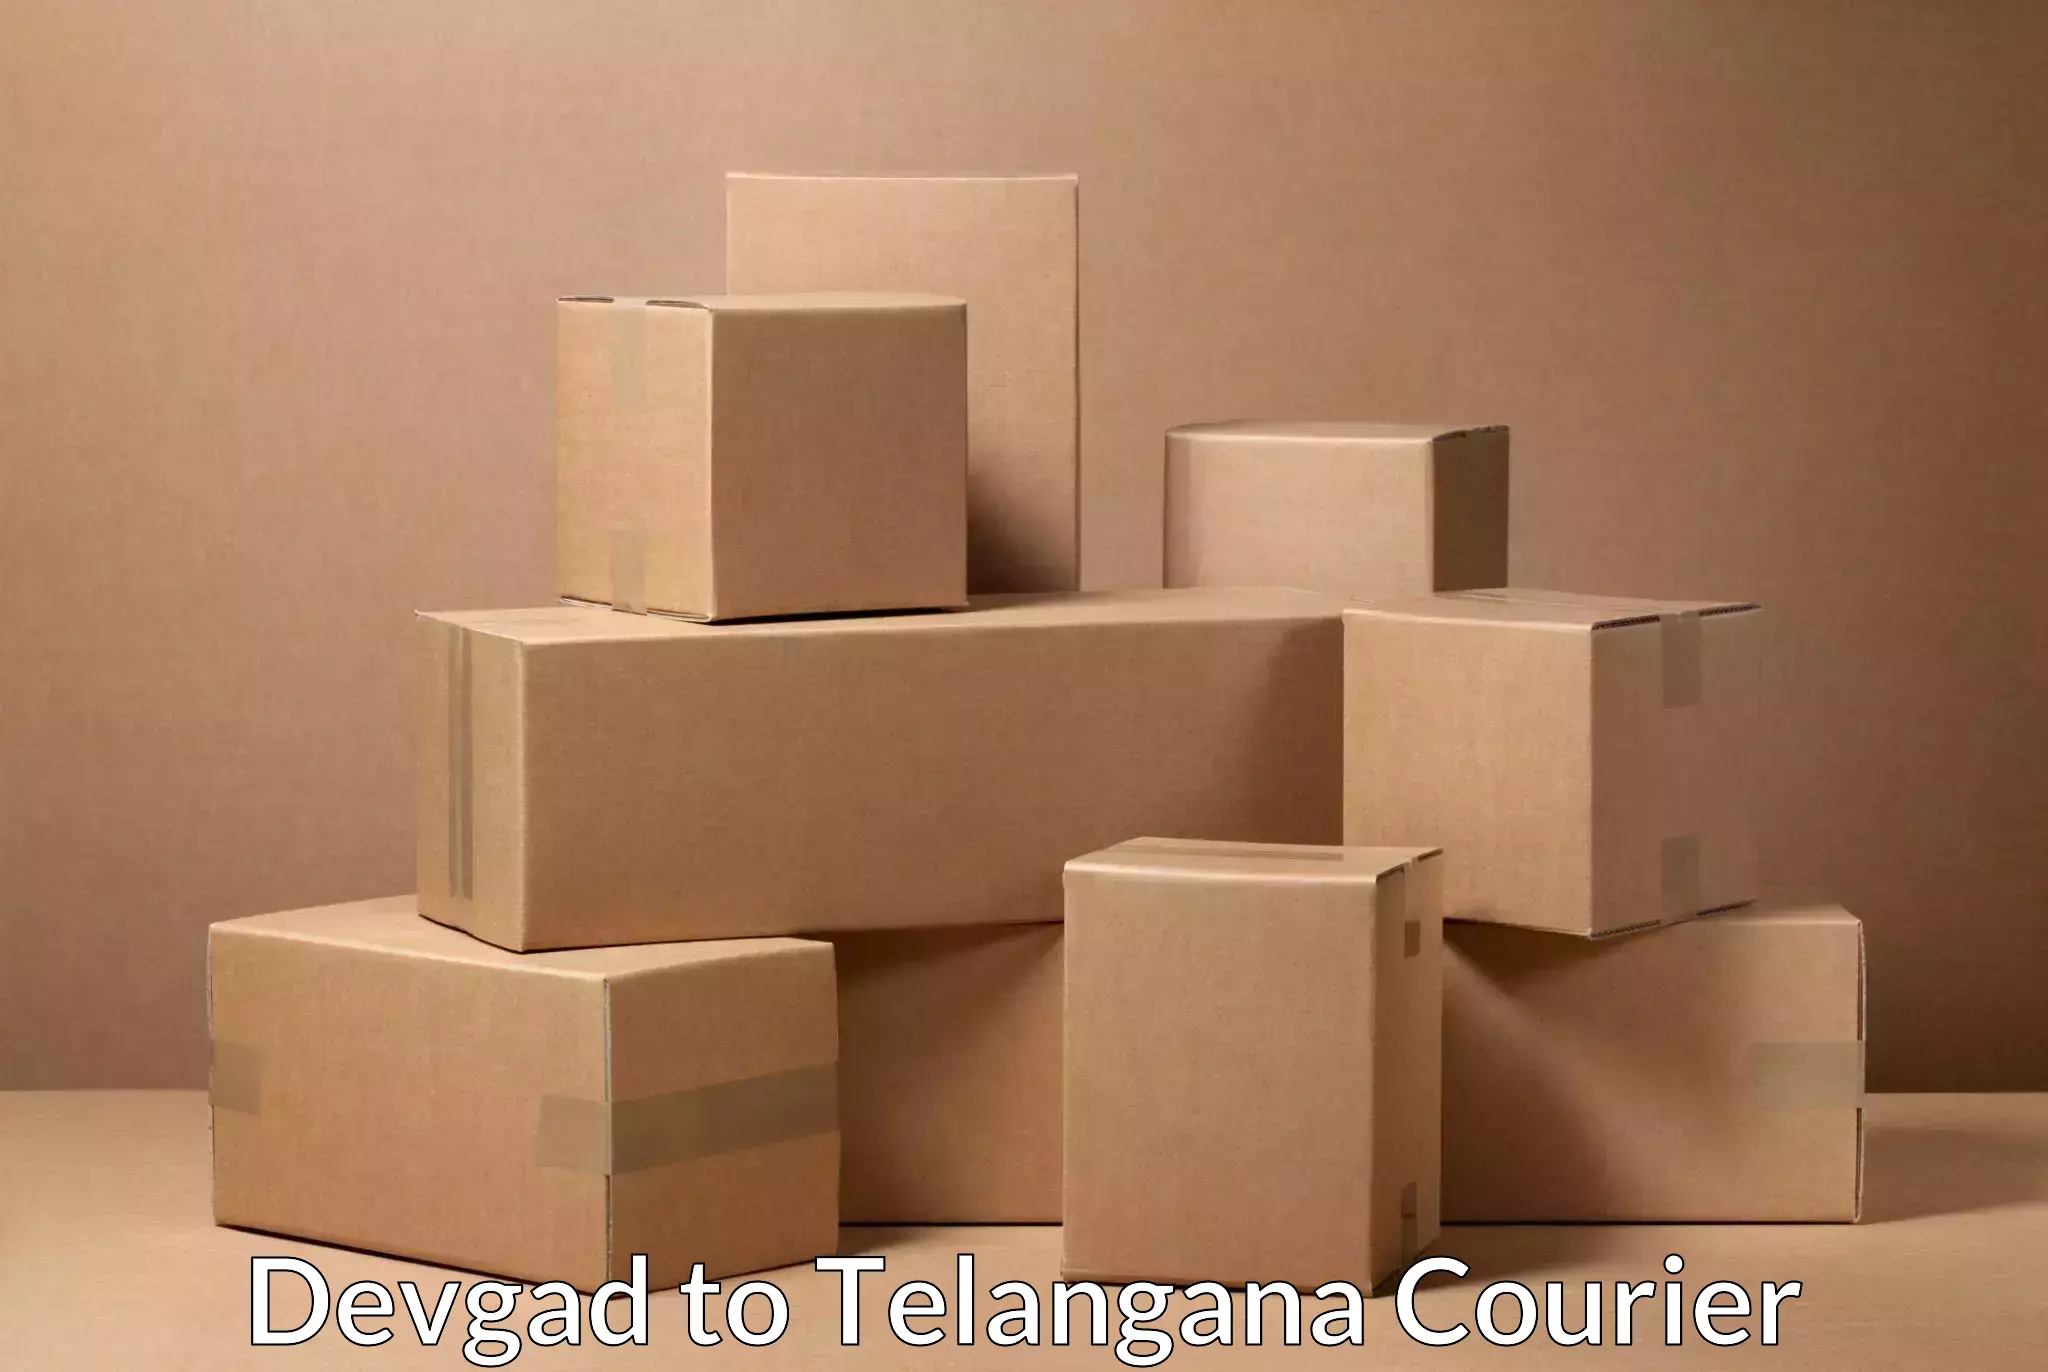 Courier service booking Devgad to IIT Hyderabad